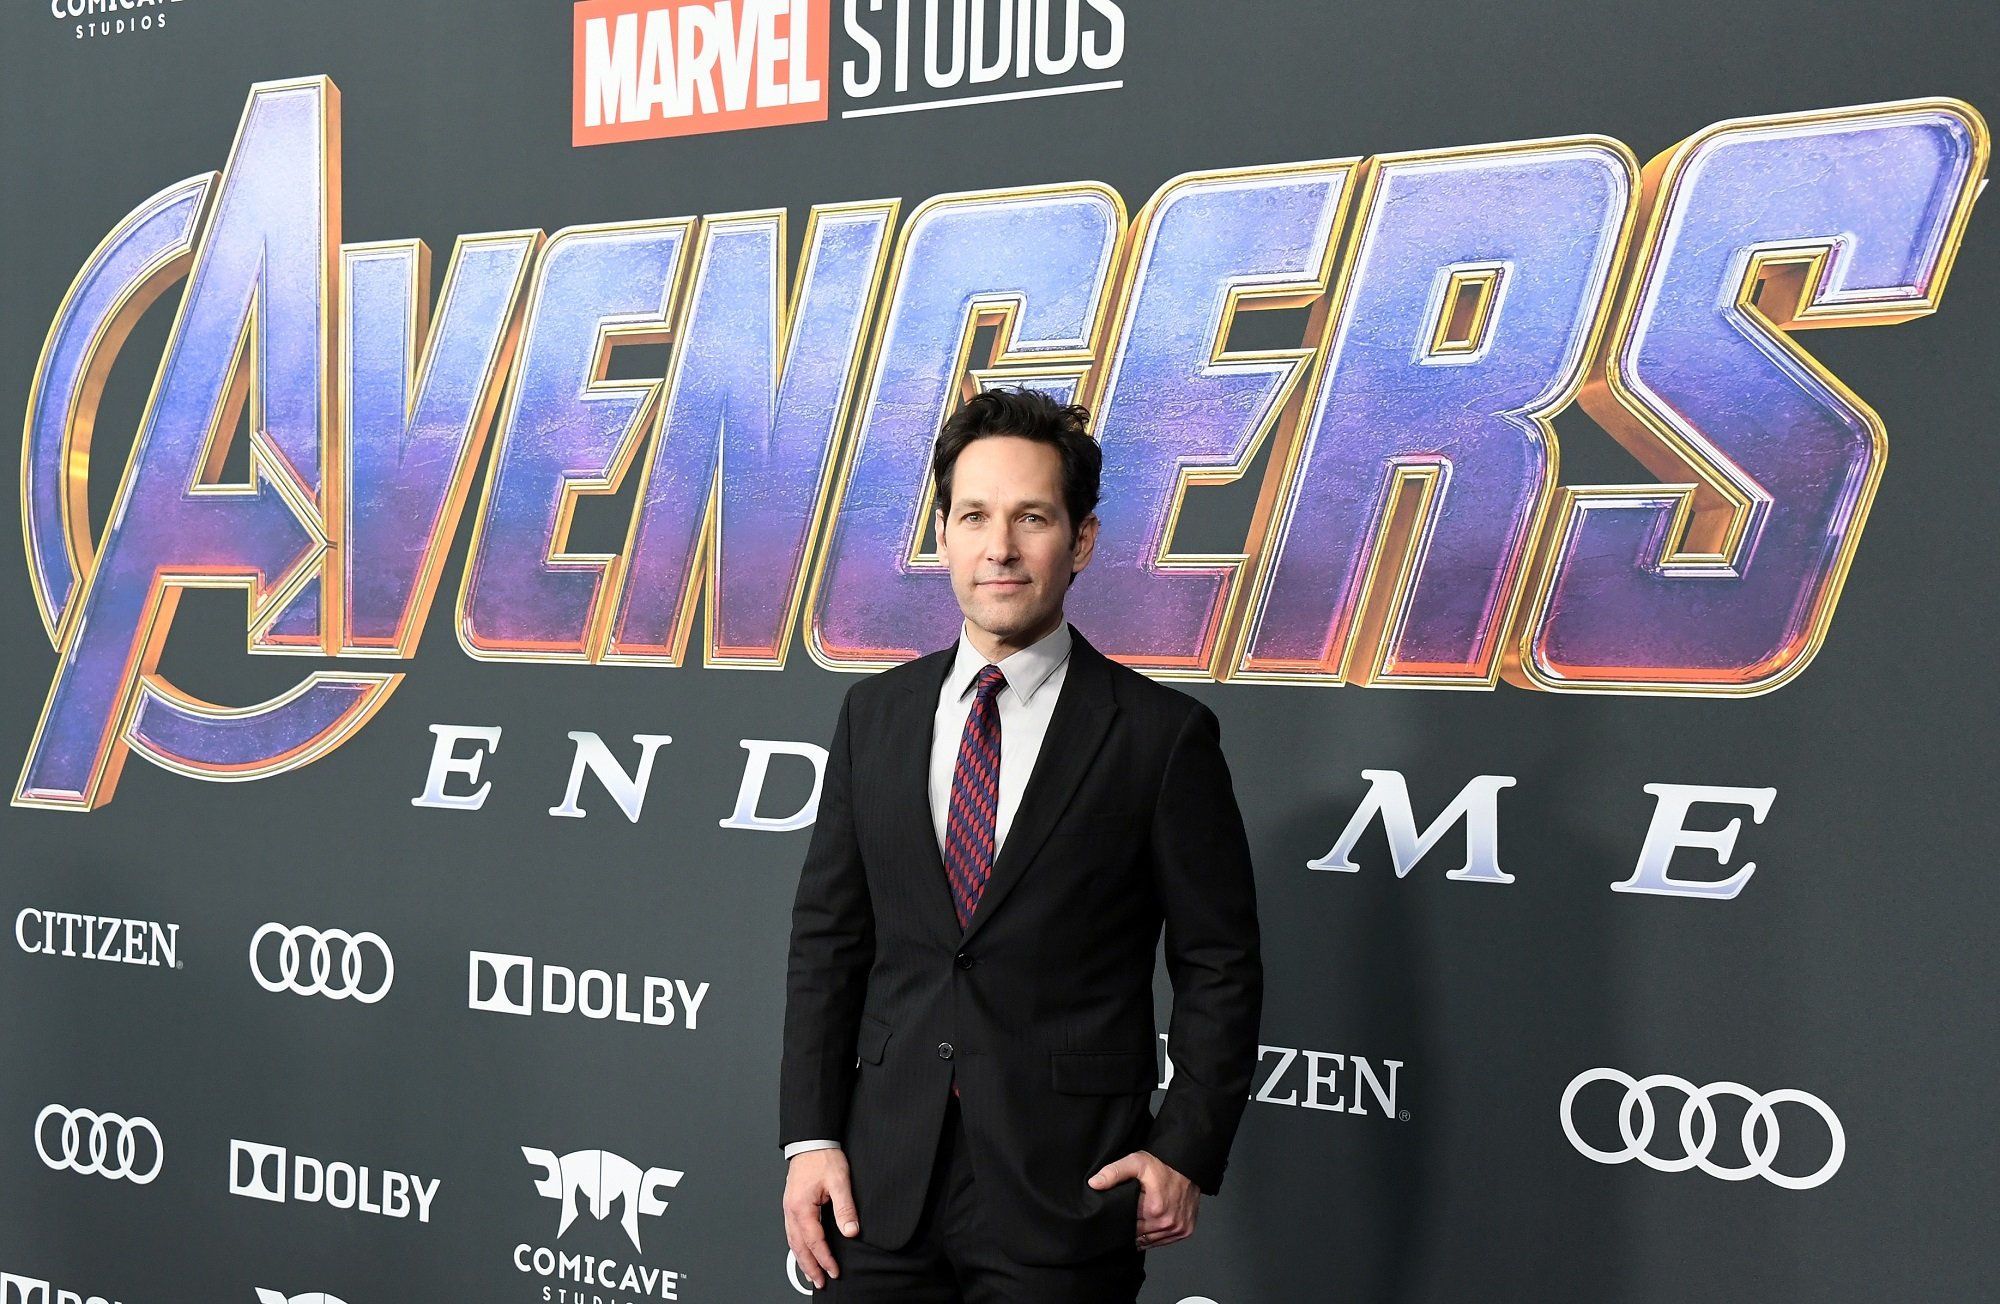 Paul Rudd  Biography, Actor, Films, Plays, Marvel, & Facts